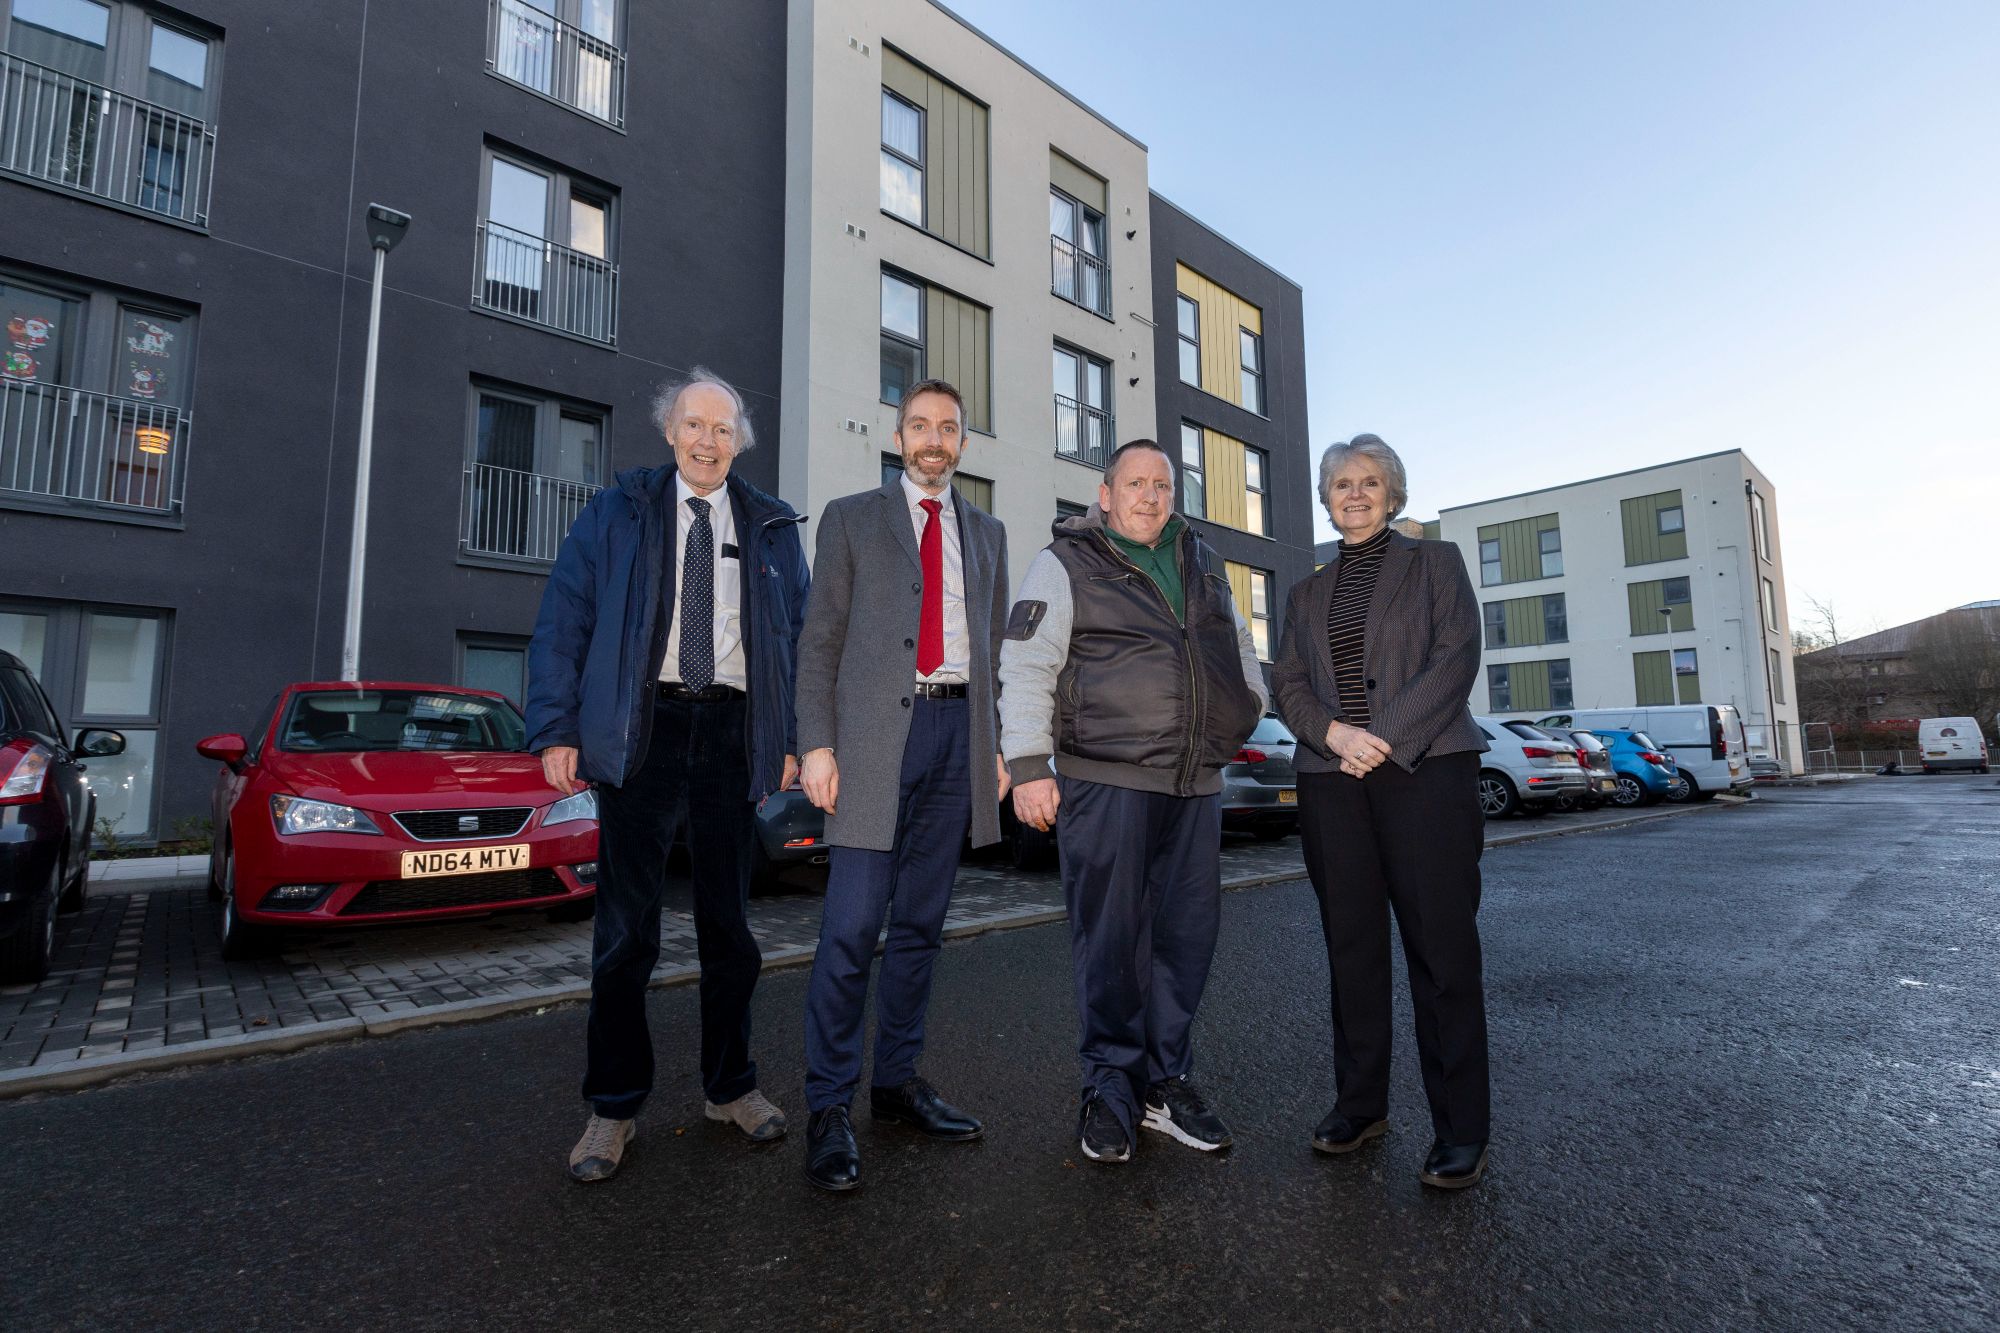 Council leader sees how Wheatley housing and care staff work together in Livingston